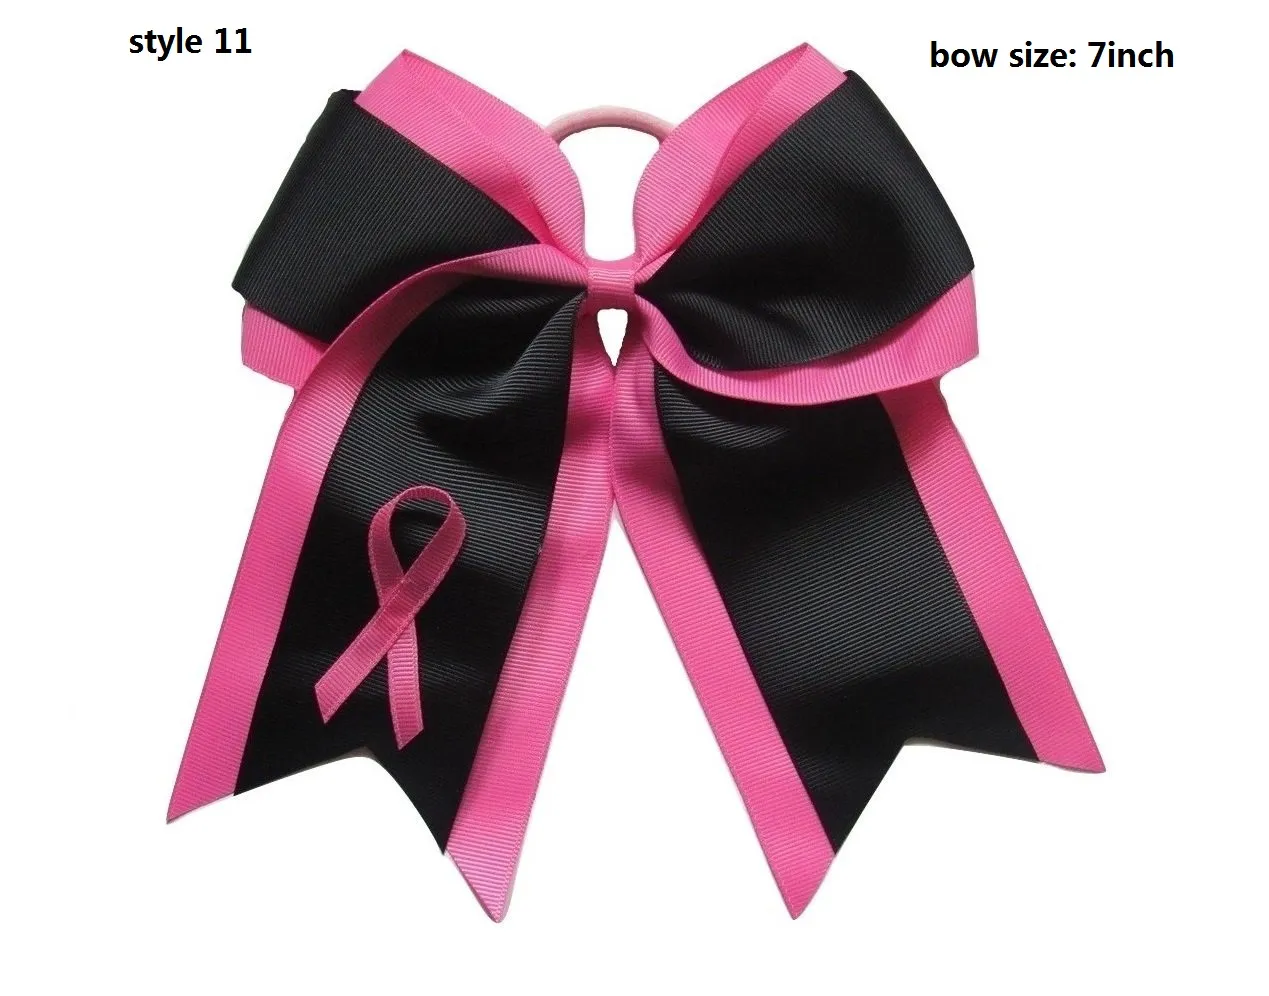 8" Breast Cancer Cheer Bows With Elastic Hair Band For Kids Girls Large Handmade Printed Ribbon Hair Bows Hair Accessories 11style 